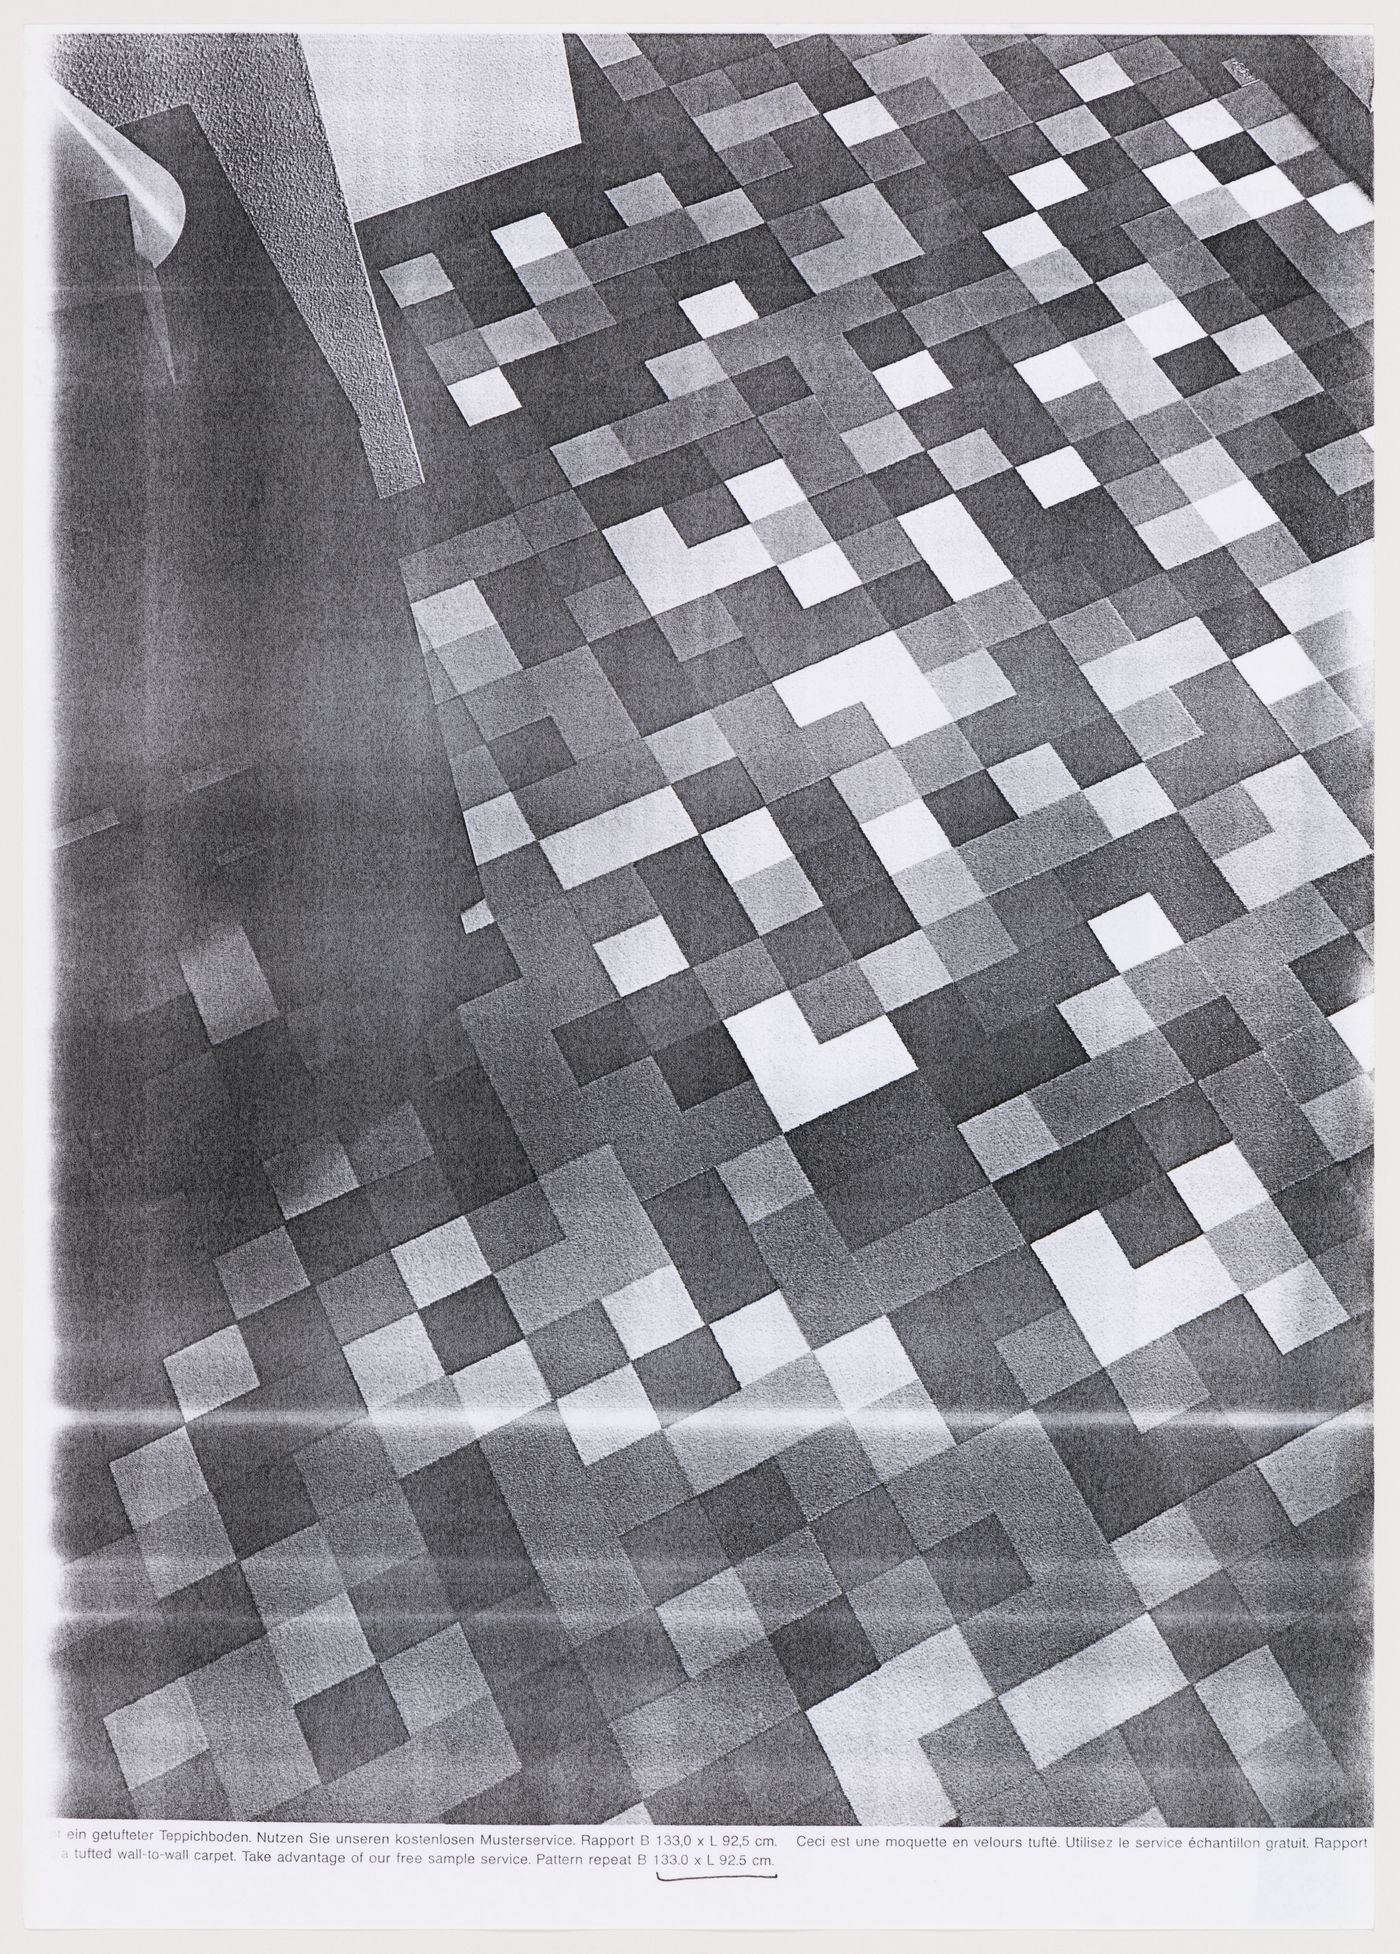 Gerhard Richter. View of ''1025 Farben'' carpet. From the Farben series (c. 1970)